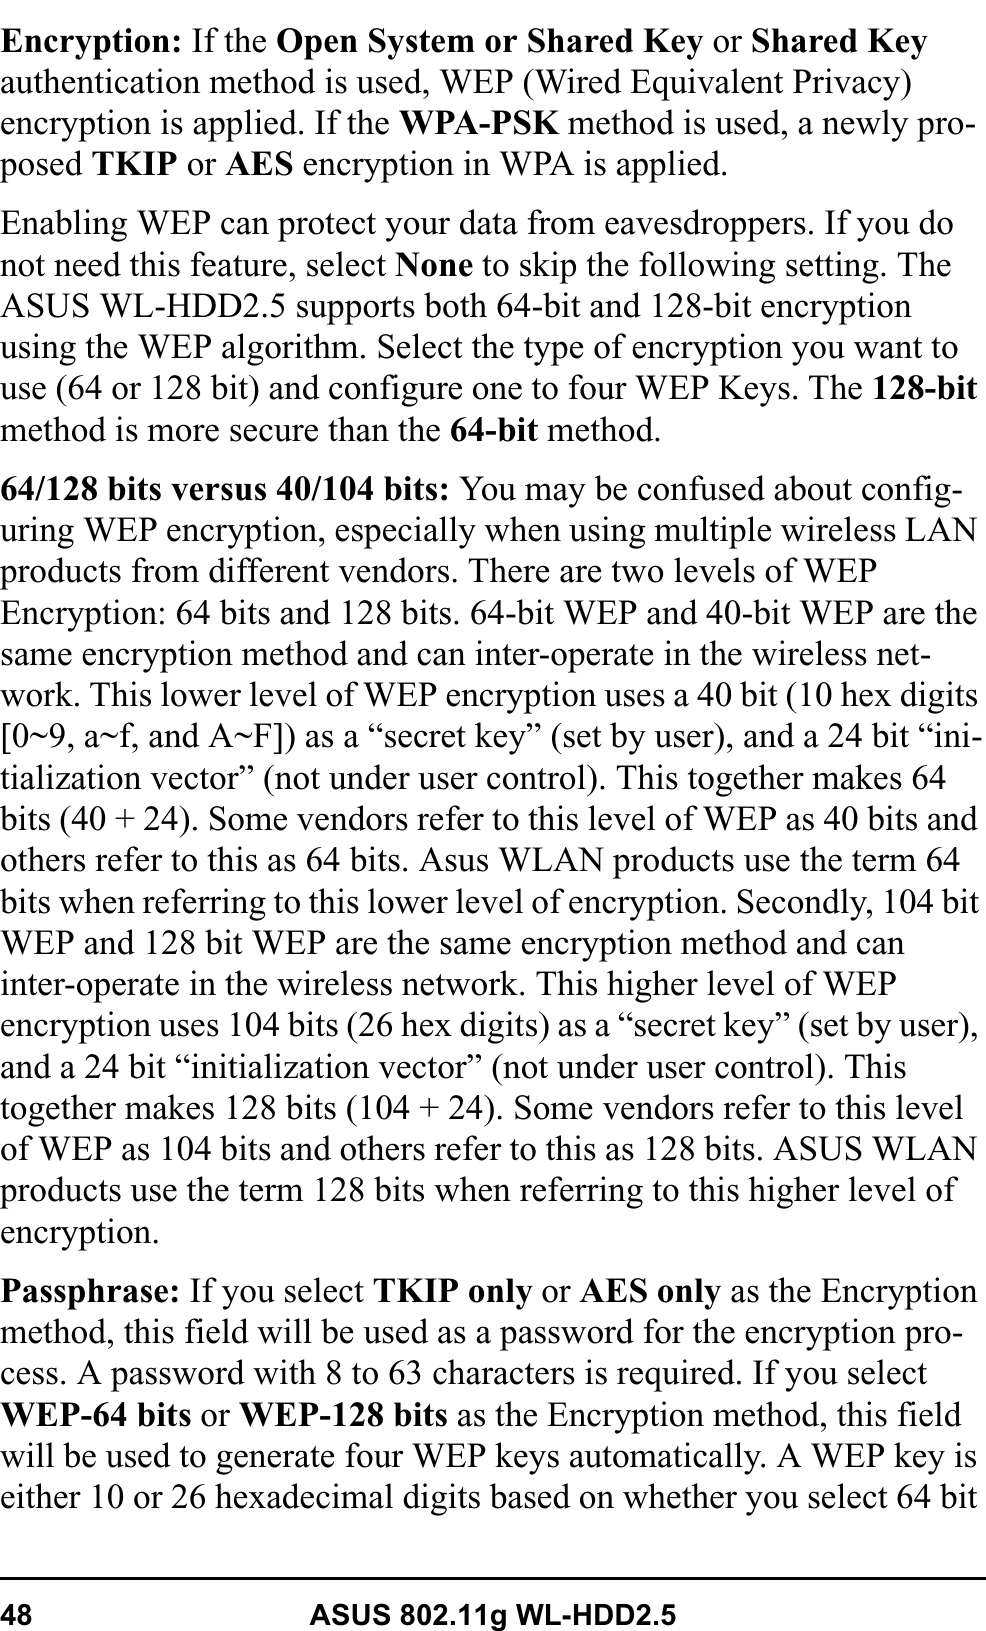 48 ASUS 802.11g WL-HDD2.5Encryption: If the Open System or Shared Key or Shared Keyauthentication method is used, WEP (Wired Equivalent Privacy) encryption is applied. If the WPA-PSK method is used, a newly pro-posed TKIP or AES encryption in WPA is applied. Enabling WEP can protect your data from eavesdroppers. If you do not need this feature, select None to skip the following setting. The ASUS WL-HDD2.5 supports both 64-bit and 128-bit encryption using the WEP algorithm. Select the type of encryption you want to use (64 or 128 bit) and configure one to four WEP Keys. The 128-bitmethod is more secure than the 64-bit method.64/128 bits versus 40/104 bits: You may be confused about config-uring WEP encryption, especially when using multiple wireless LAN products from different vendors. There are two levels of WEP Encryption: 64 bits and 128 bits. 64-bit WEP and 40-bit WEP are the same encryption method and can inter-operate in the wireless net-work. This lower level of WEP encryption uses a 40 bit (10 hex digits [0~9, a~f, and A~F]) as a “secret key” (set by user), and a 24 bit “ini-tialization vector” (not under user control). This together makes 64 bits (40 + 24). Some vendors refer to this level of WEP as 40 bits and others refer to this as 64 bits. Asus WLAN products use the term 64 bits when referring to this lower level of encryption. Secondly, 104 bit WEP and 128 bit WEP are the same encryption method and can inter-operate in the wireless network. This higher level of WEP encryption uses 104 bits (26 hex digits) as a “secret key” (set by user), and a 24 bit “initialization vector” (not under user control). This together makes 128 bits (104 + 24). Some vendors refer to this level of WEP as 104 bits and others refer to this as 128 bits. ASUS WLAN products use the term 128 bits when referring to this higher level of encryption.Passphrase: If you select TKIP only or AES only as the Encryption method, this field will be used as a password for the encryption pro-cess. A password with 8 to 63 characters is required. If you select WEP-64 bits or WEP-128 bits as the Encryption method, this field will be used to generate four WEP keys automatically. A WEP key is either 10 or 26 hexadecimal digits based on whether you select 64 bit 